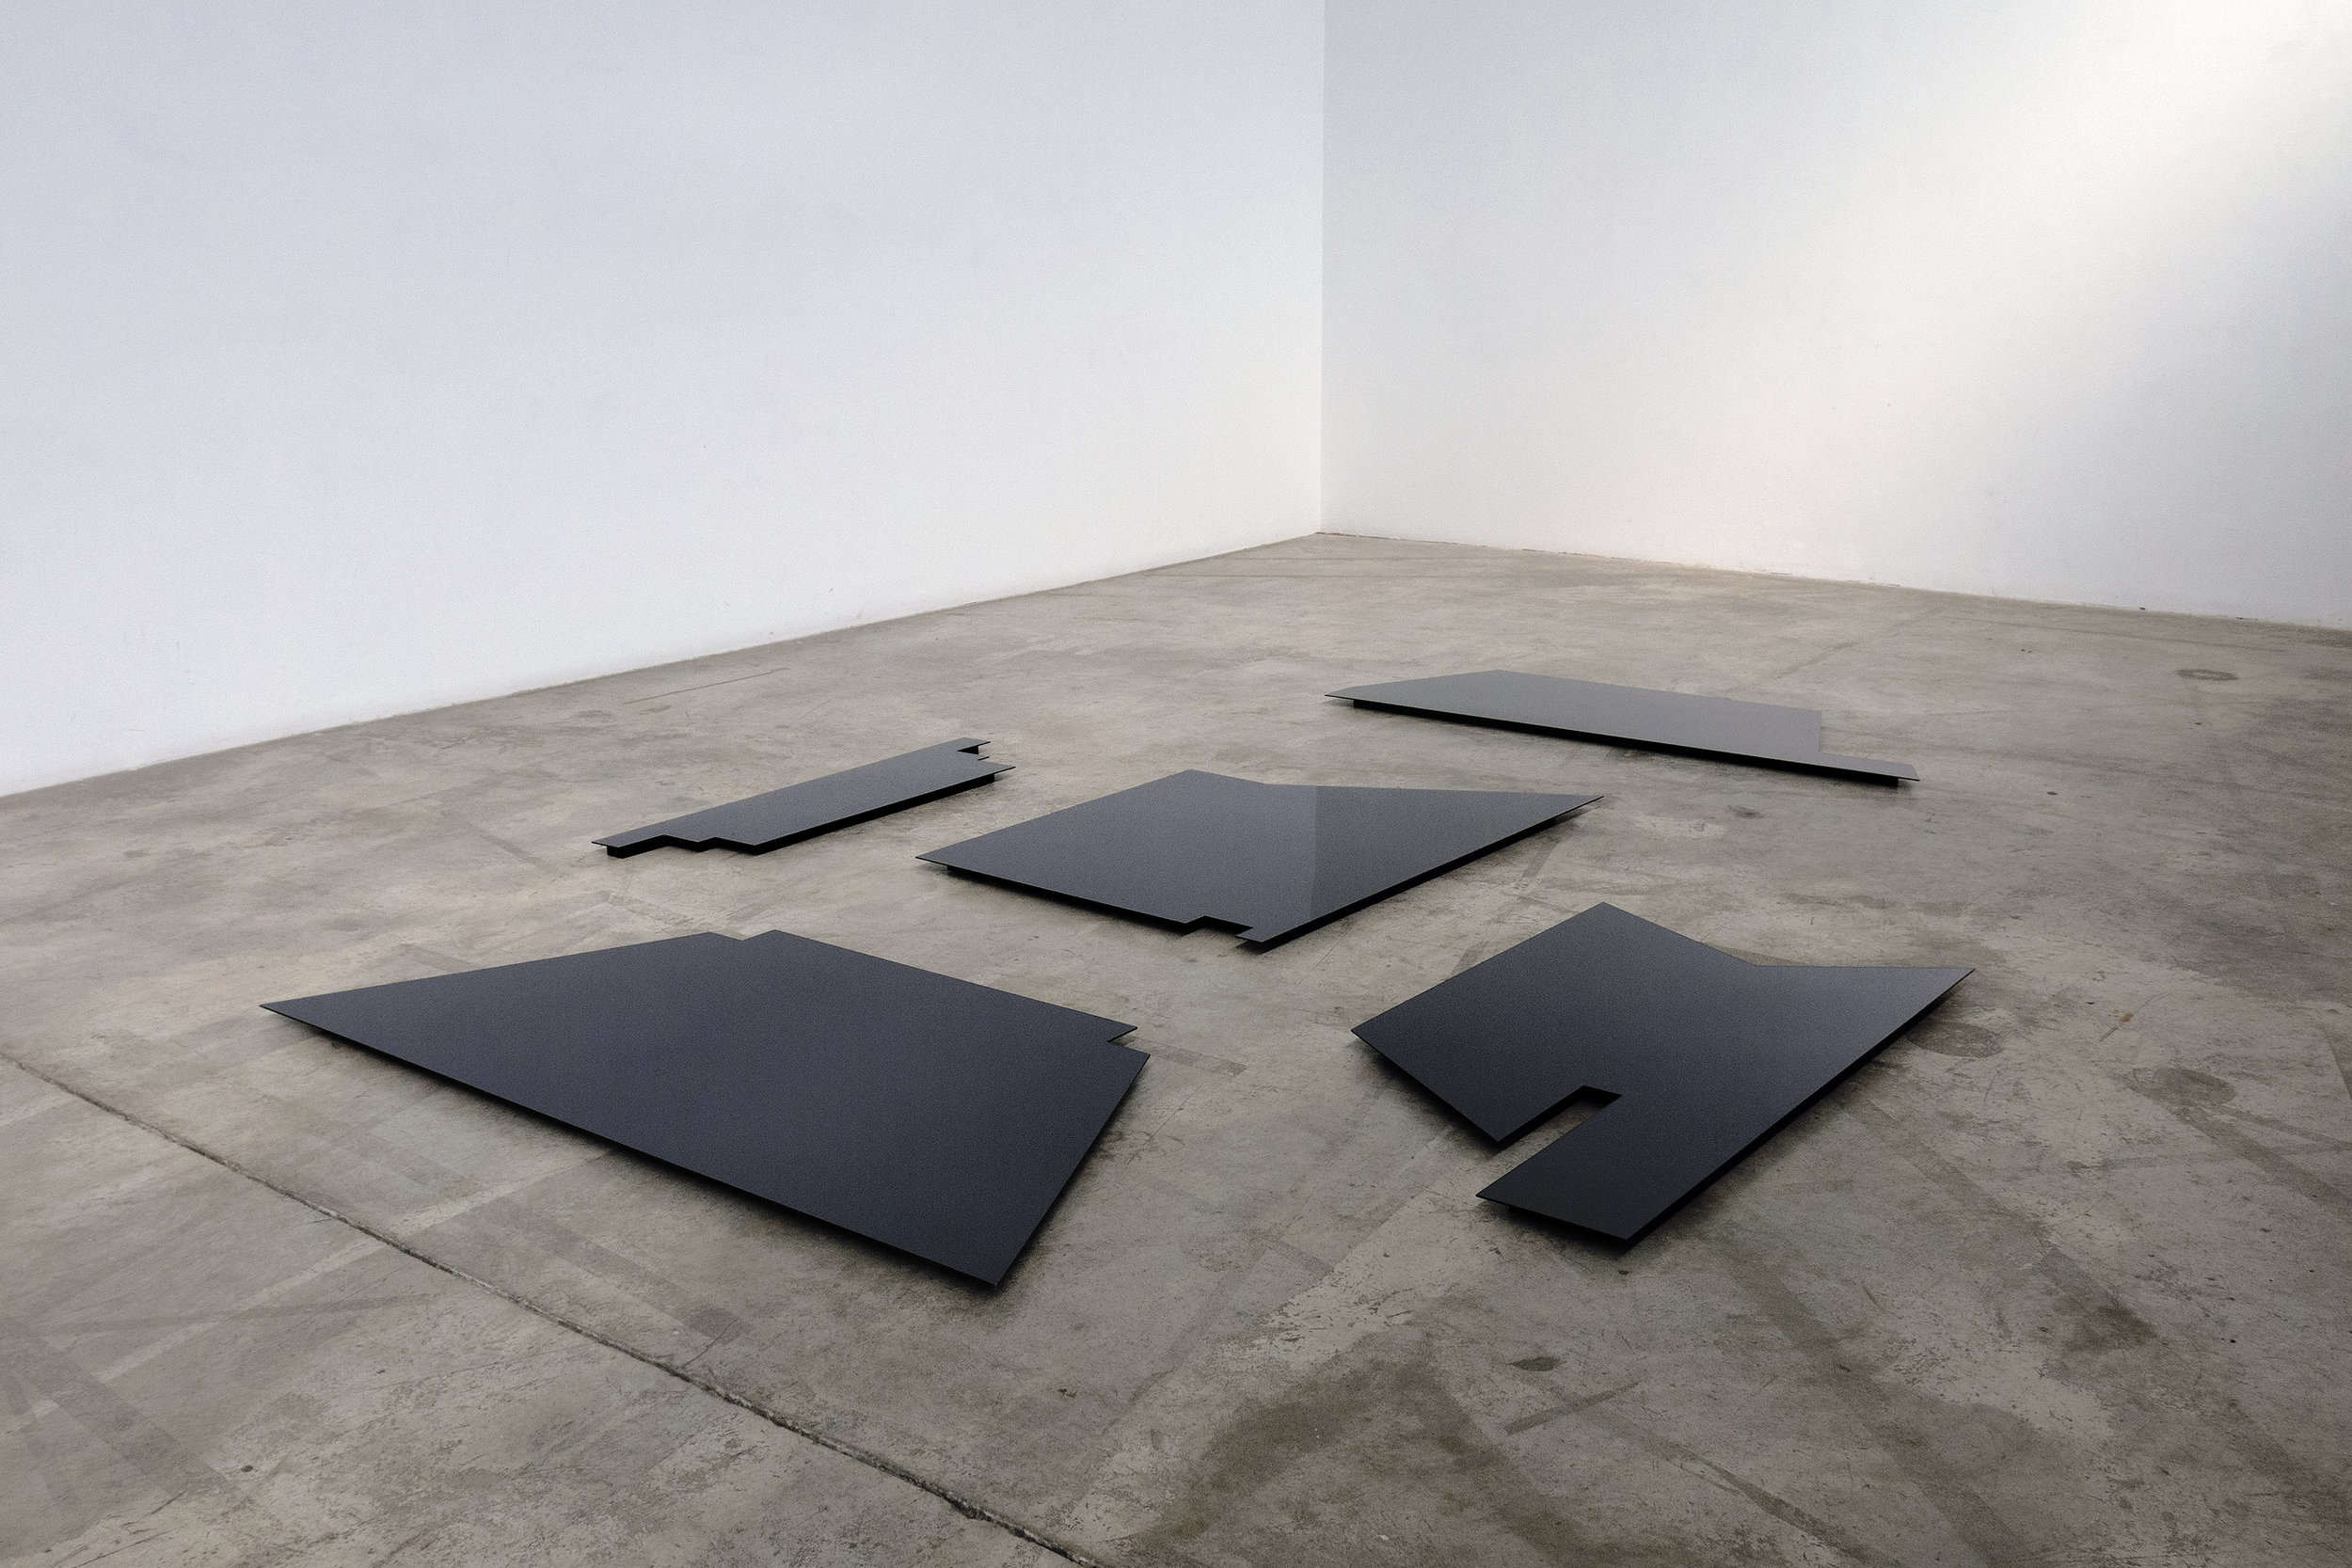   The Space In-Between Private and Public, Structures No. 1 - No. 5  2015 black acrylic mirror, archival gatorboard backing edition of 2 dimensions variable 